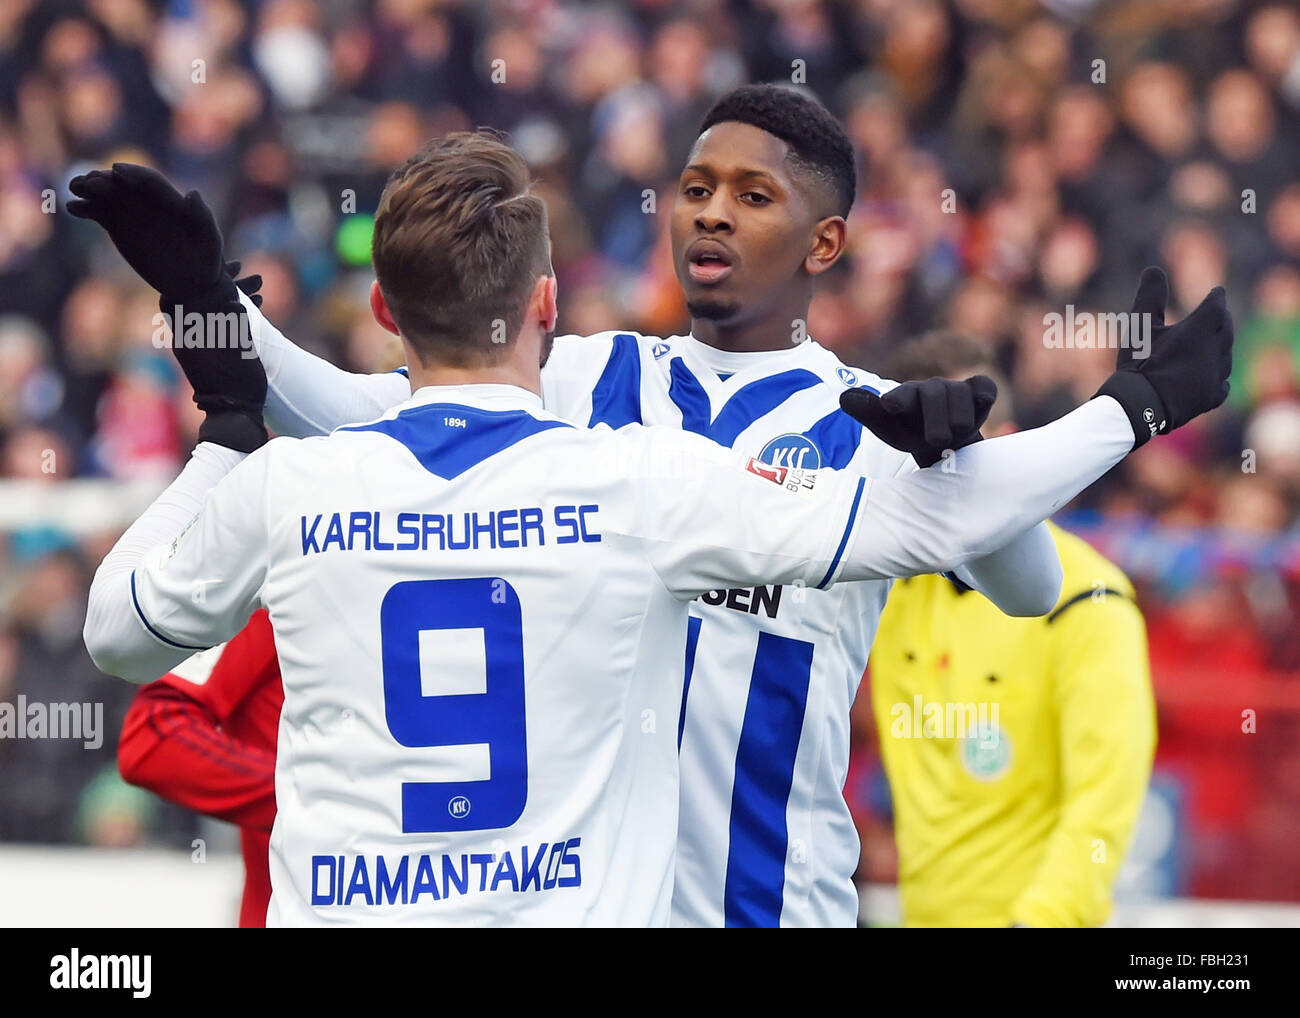 Karlsruhe, Germany. 16th Jan, 2016. Karlsruhe's Boubacar Barry (R) celebrates his 1-0 goal with Dimitris Diamantakos during the test match between Karlsruher SC and FC Bayern Munich in Wildpark Stadium in Karlsruhe, Germany, 16 January 2016. Photo: ULI DECK/dpa/Alamy Live News Stock Photo